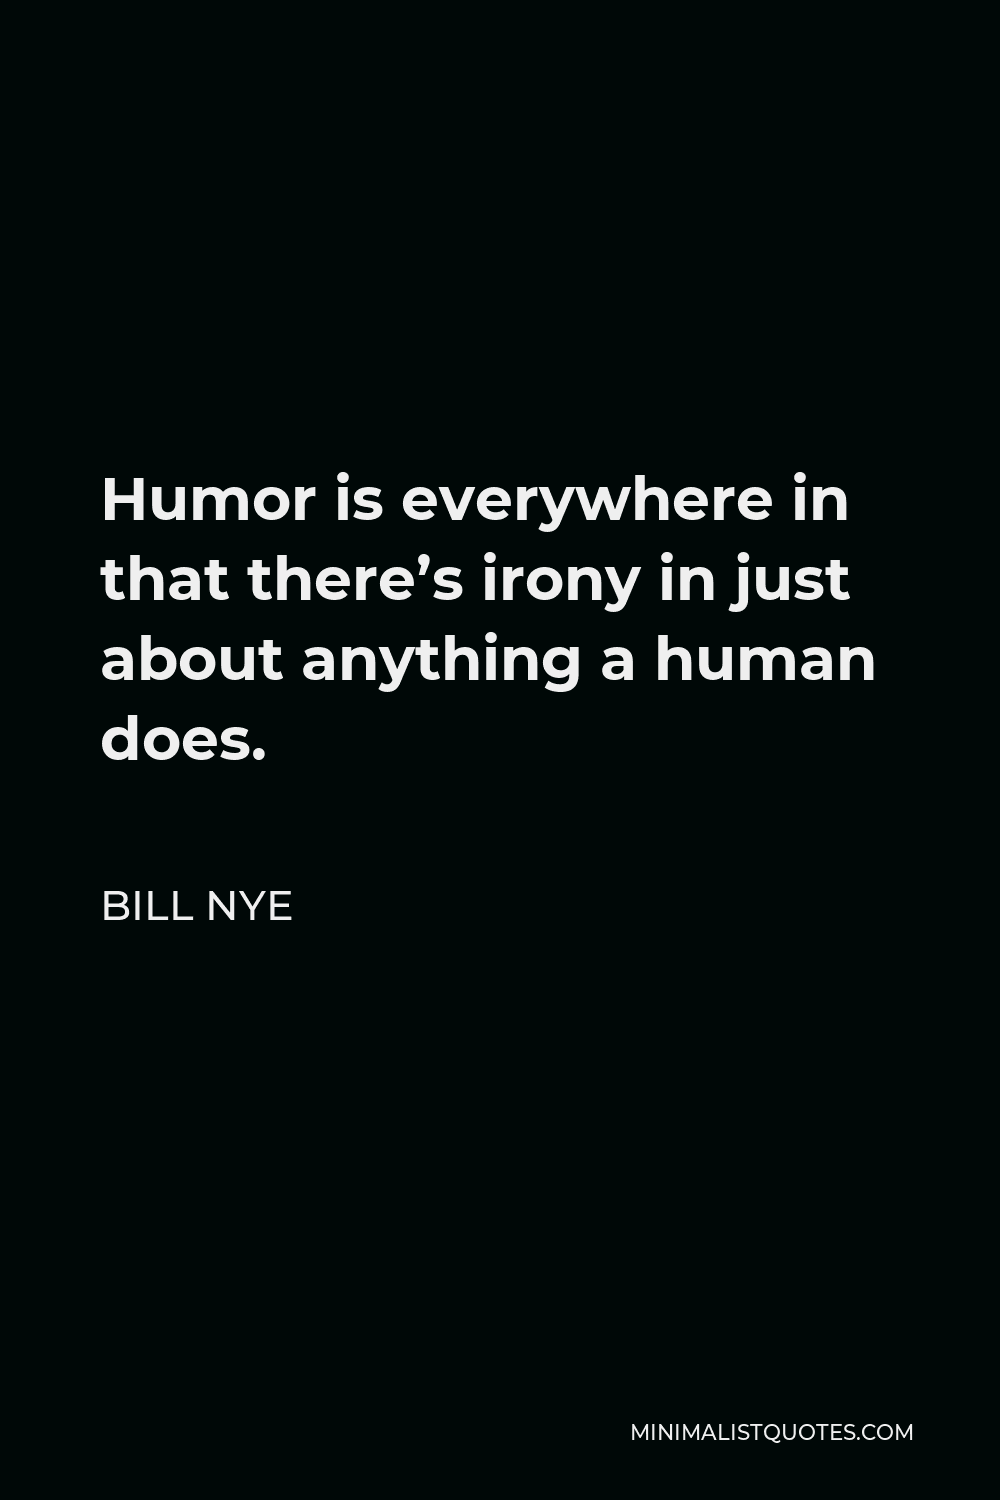 Bill Nye Quote - Humor is everywhere in that there’s irony in just about anything a human does.